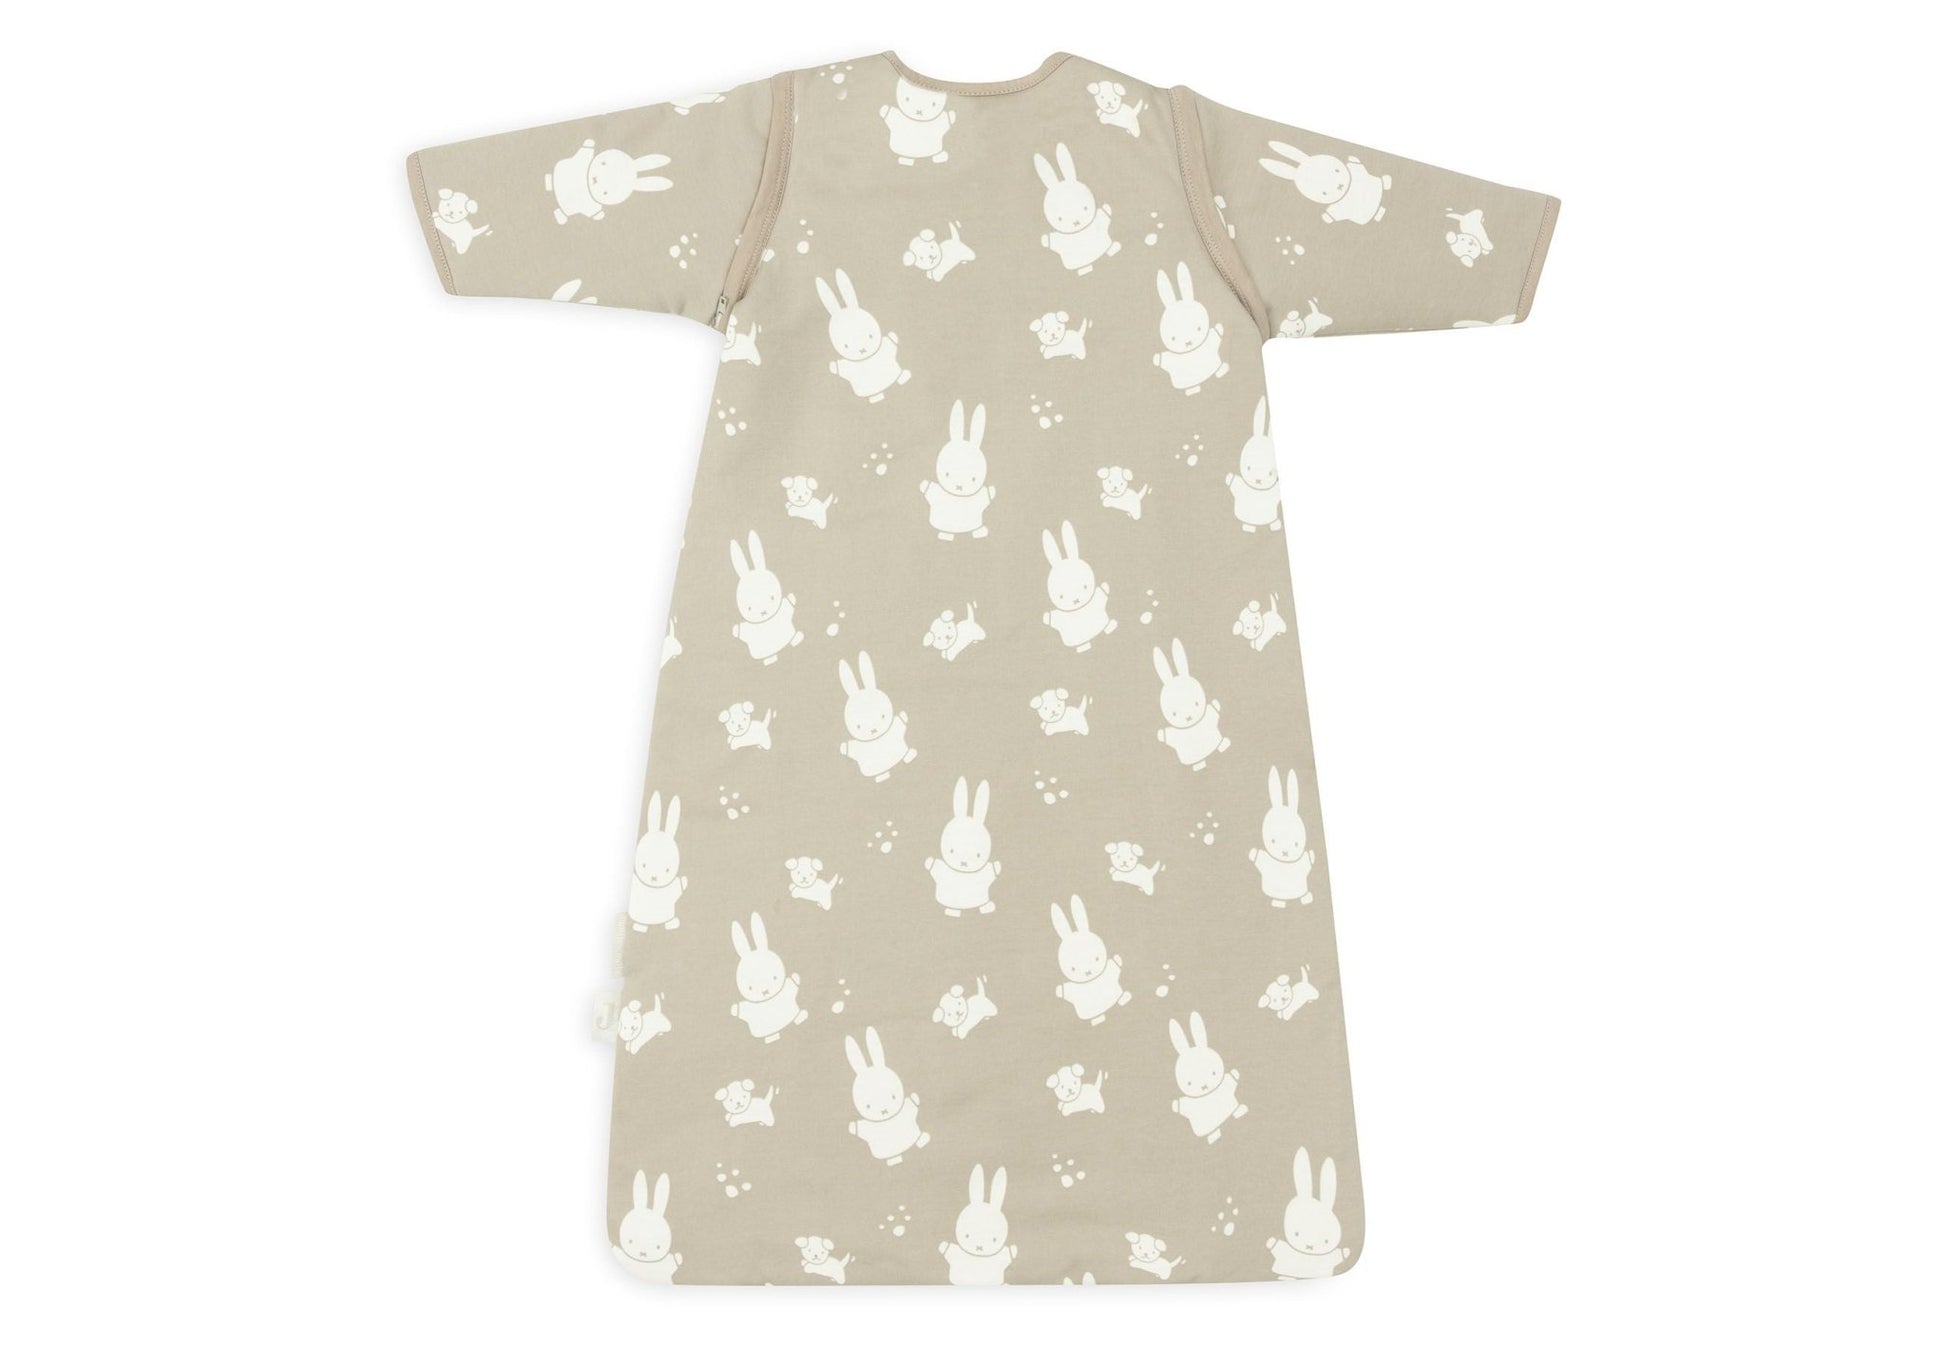 Gigoteuse avec Manches Amovibles Miffy - Olive Green - 18/36 mois - Lina et Compagnie